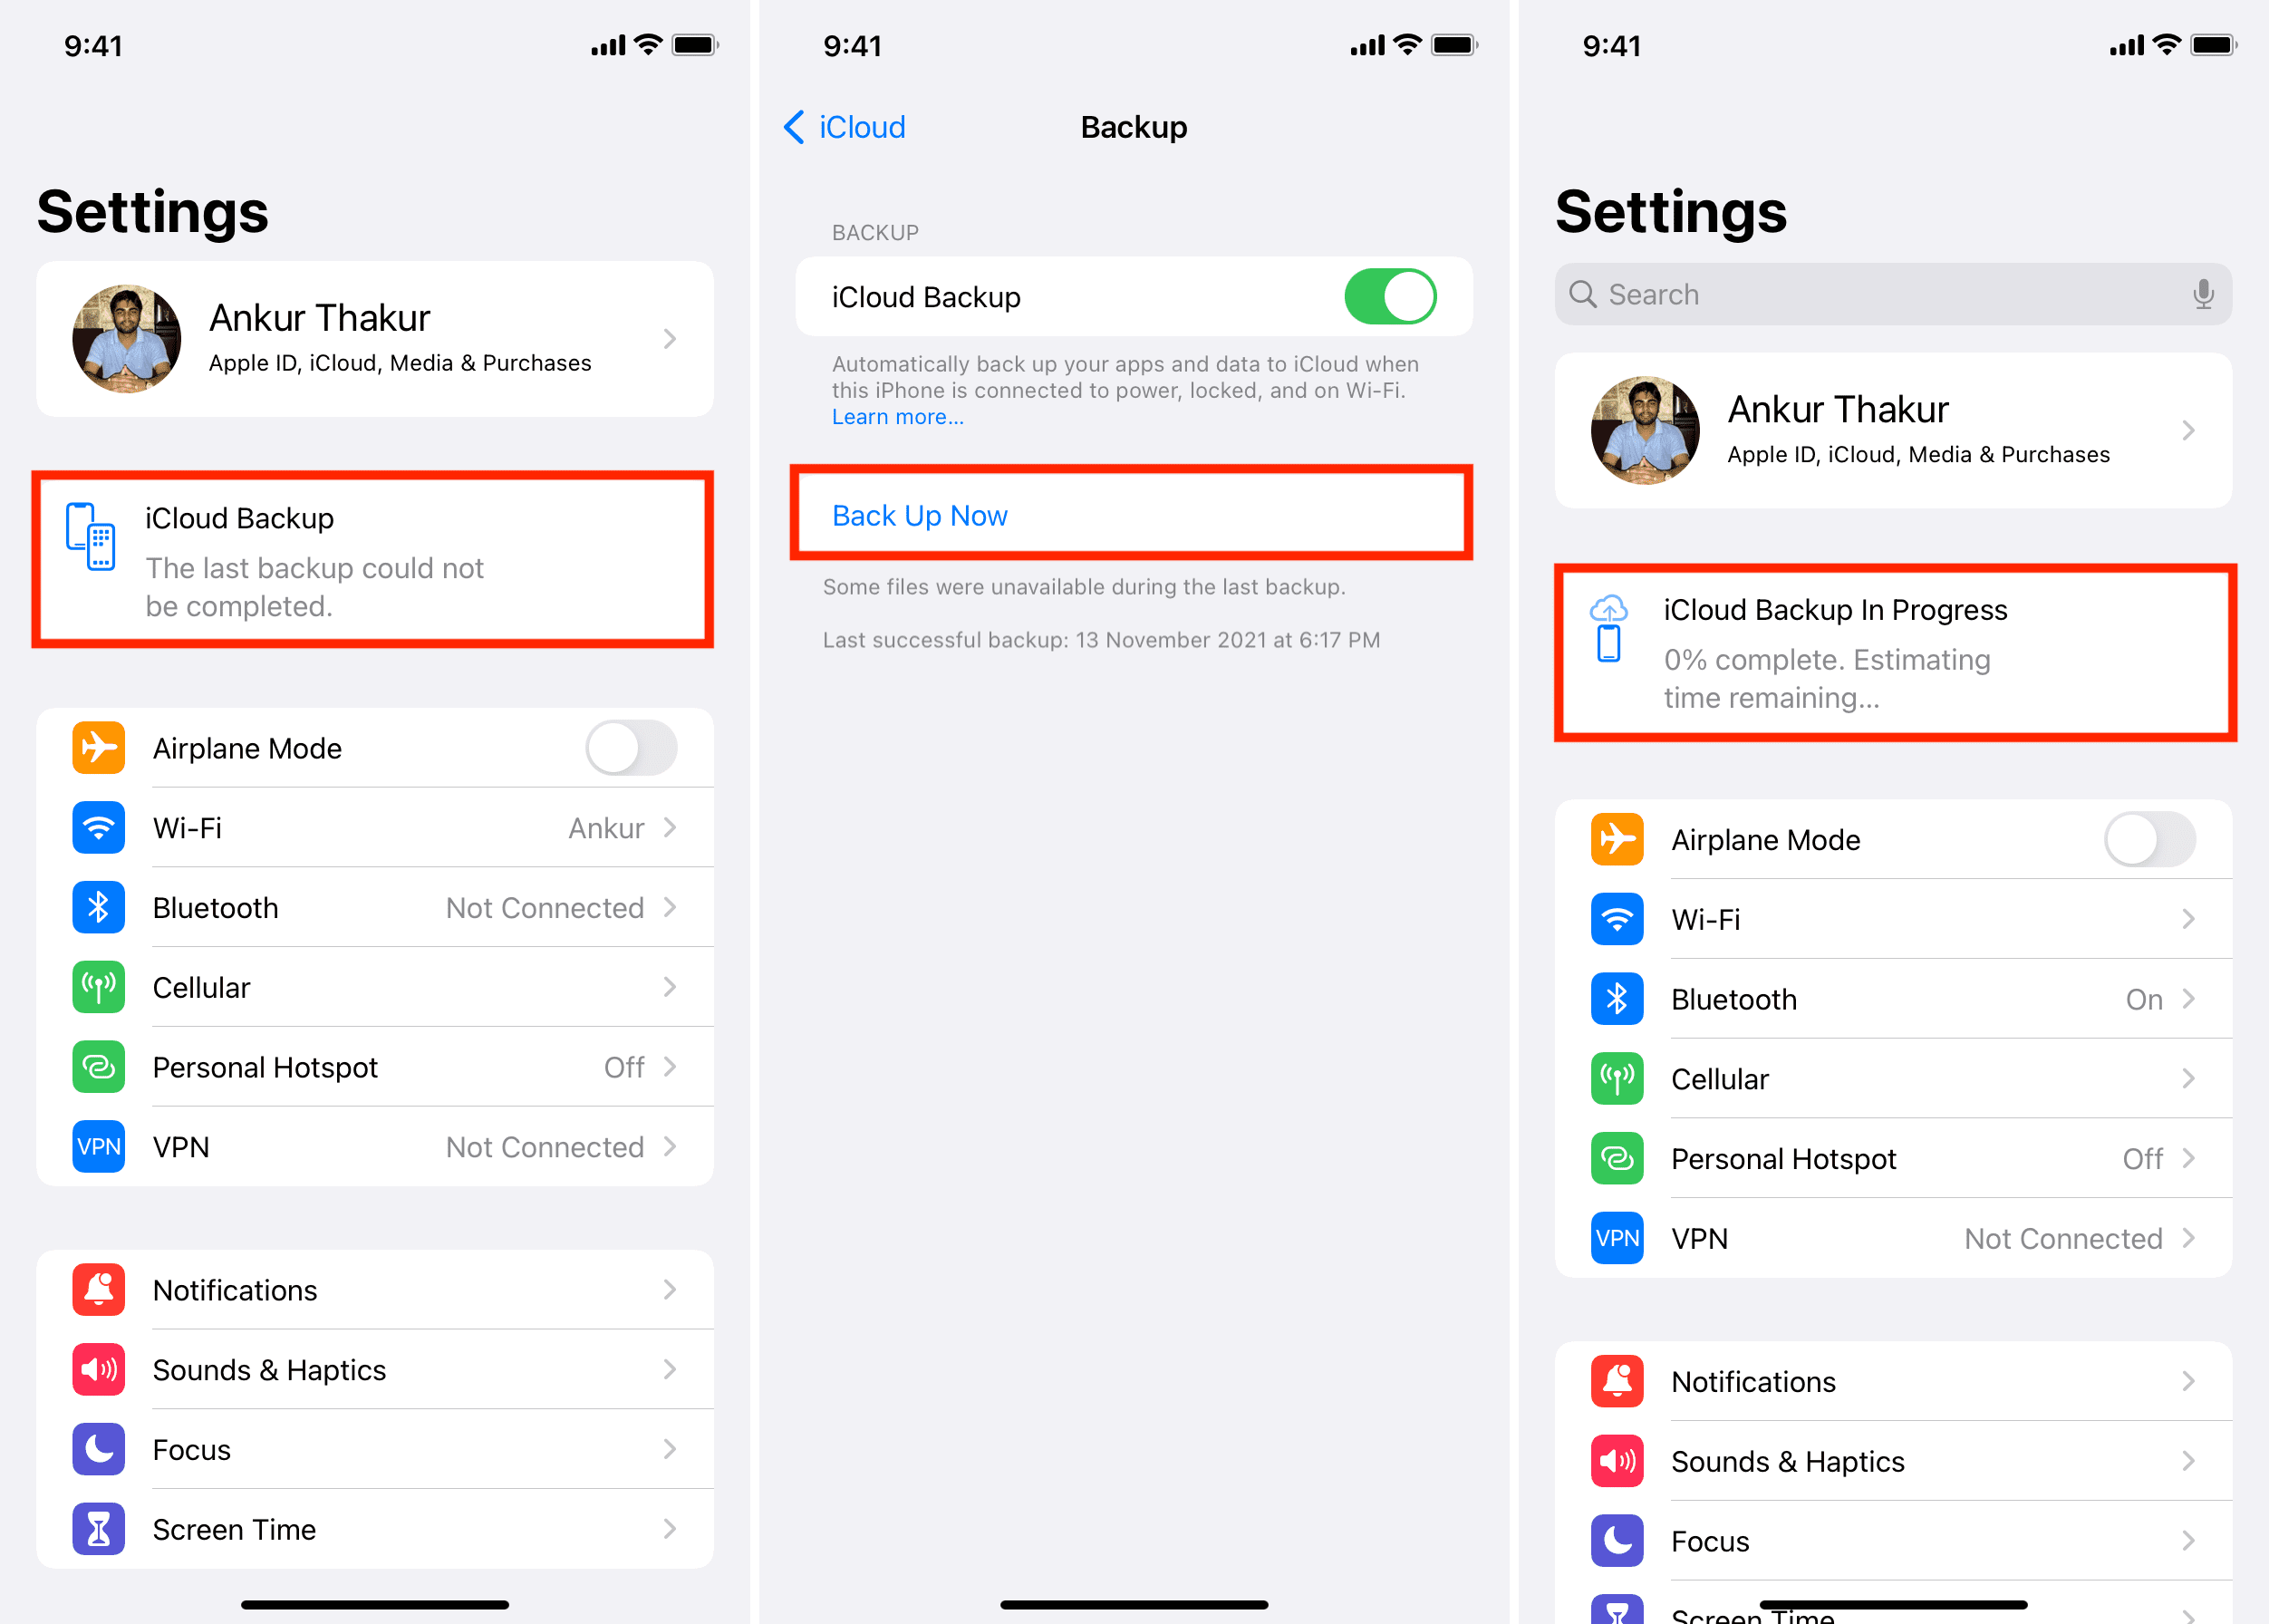 Fix The last backup could not be completed for iCloud backup on iPhone copy